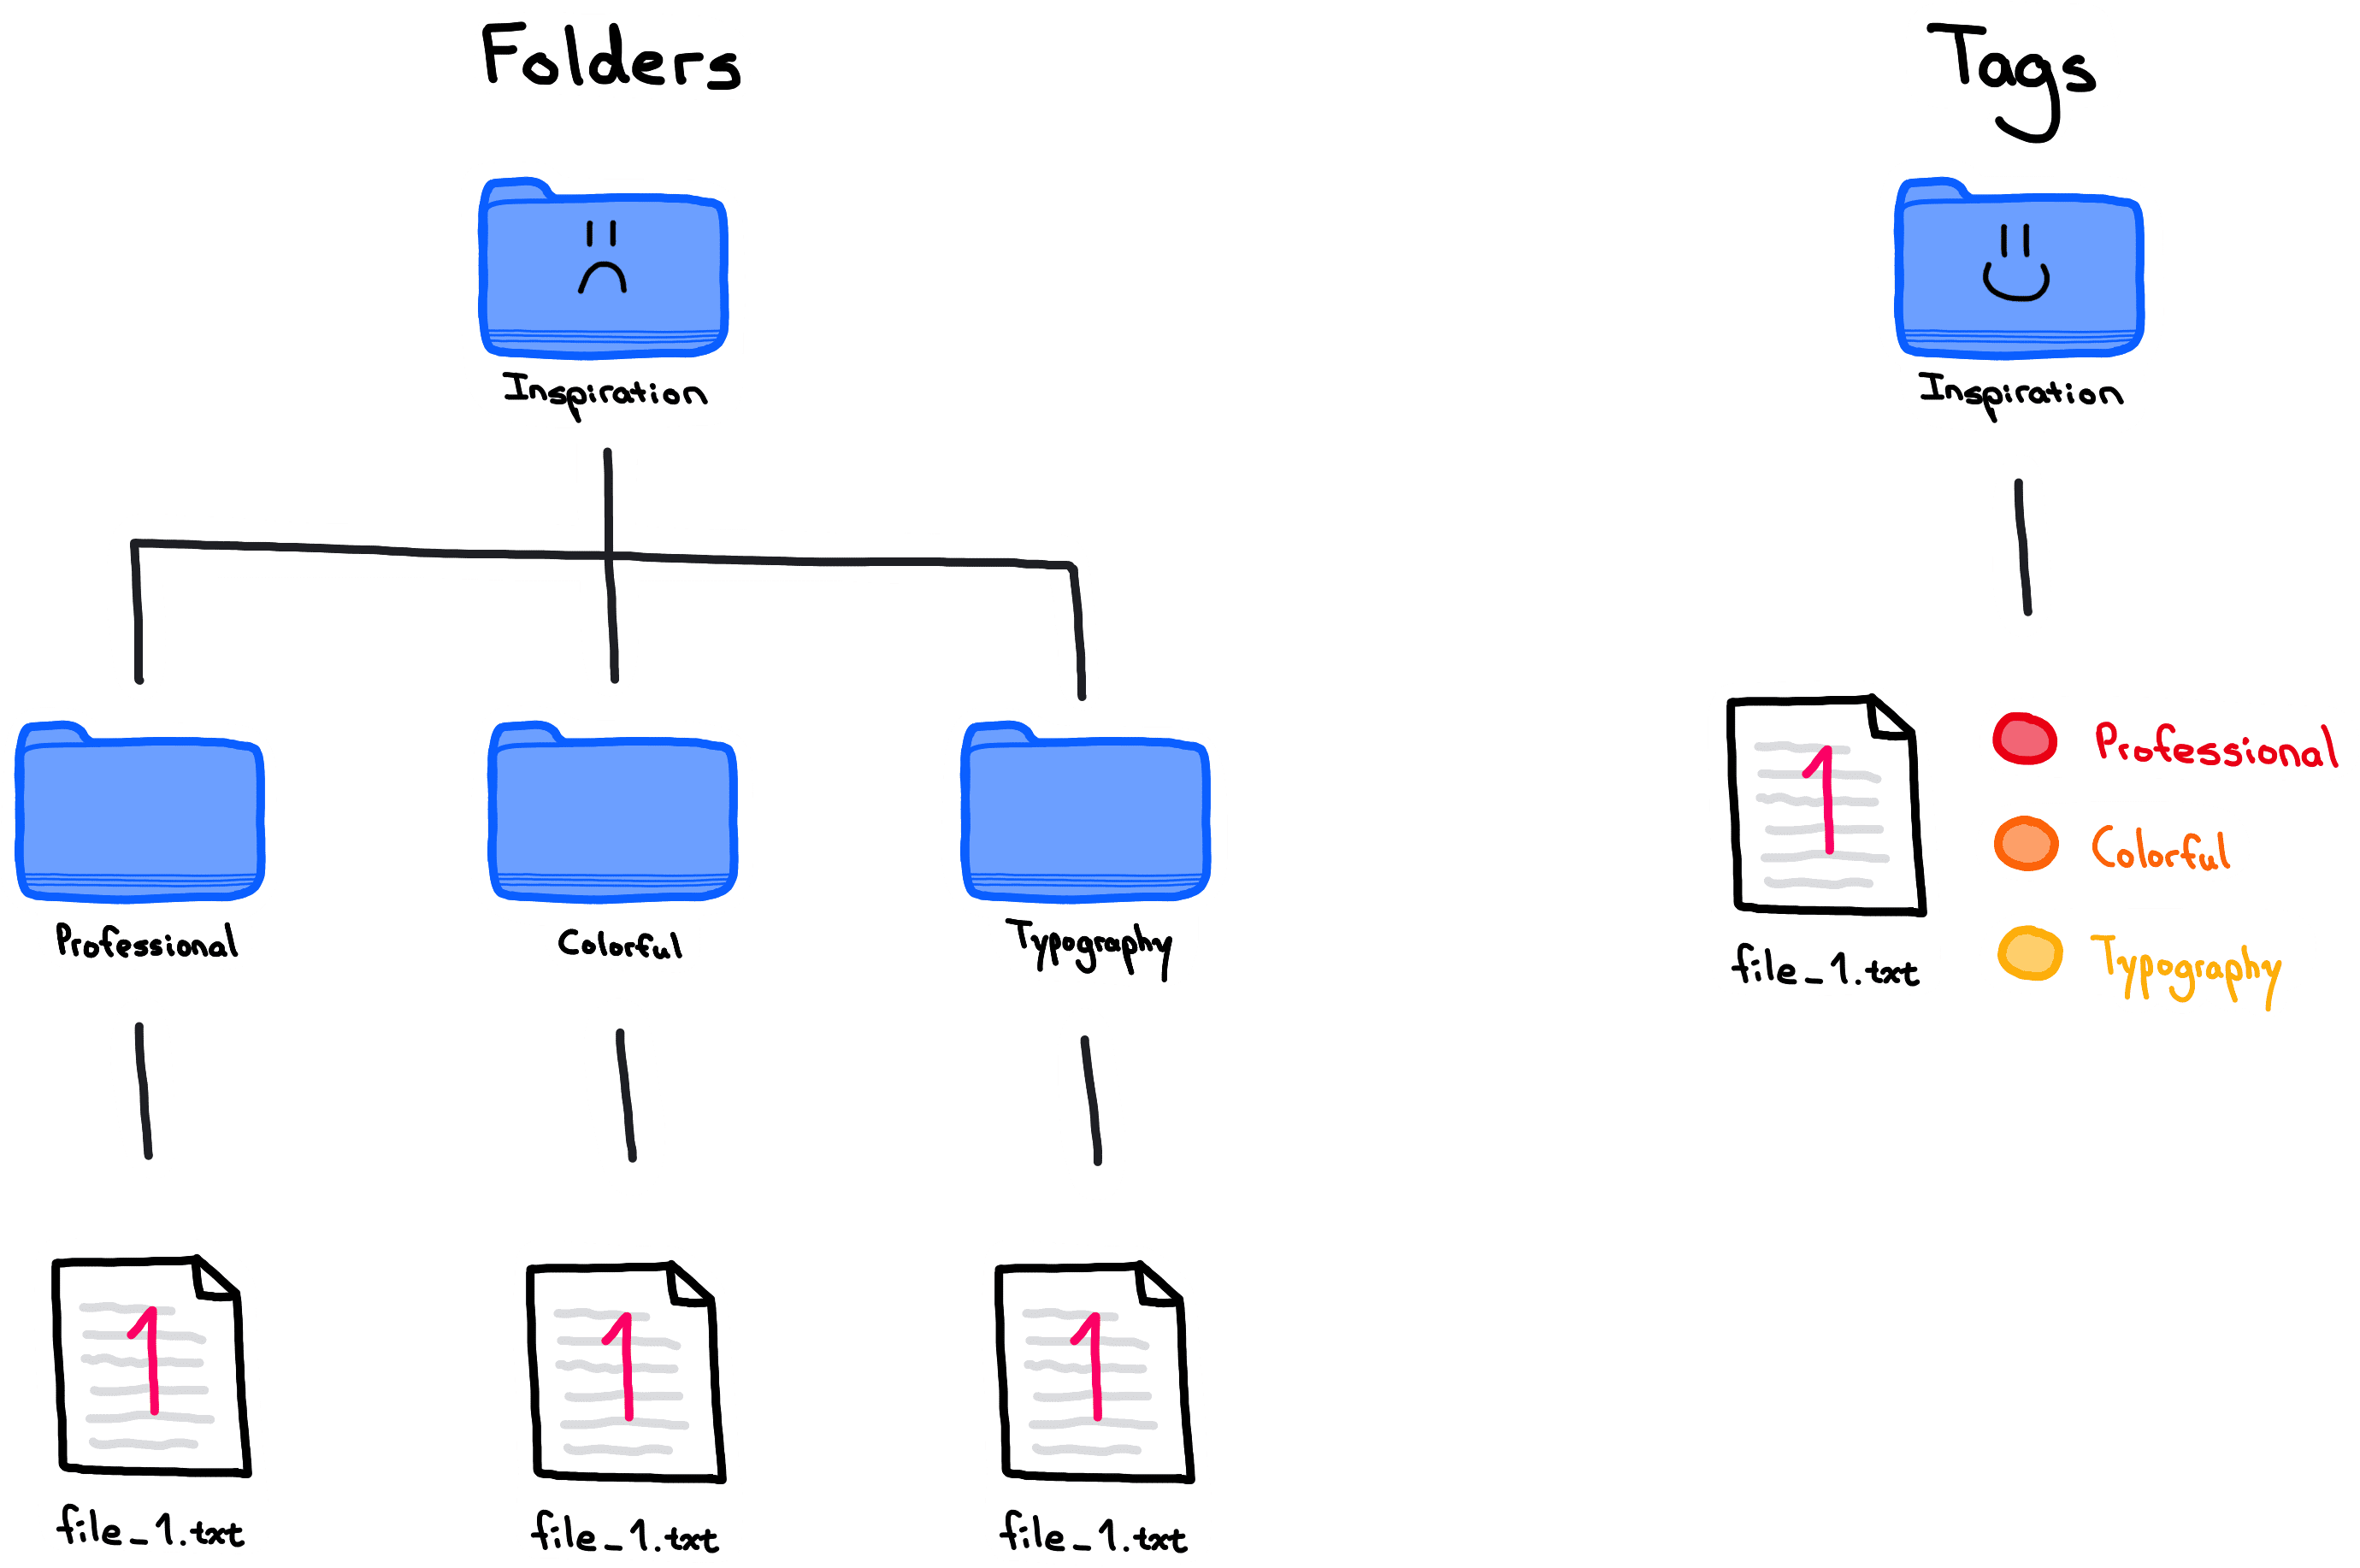 A sketch showing the file duplicates required to get the same organizational result with Folders, compared to Tags where no duplicates are necessary